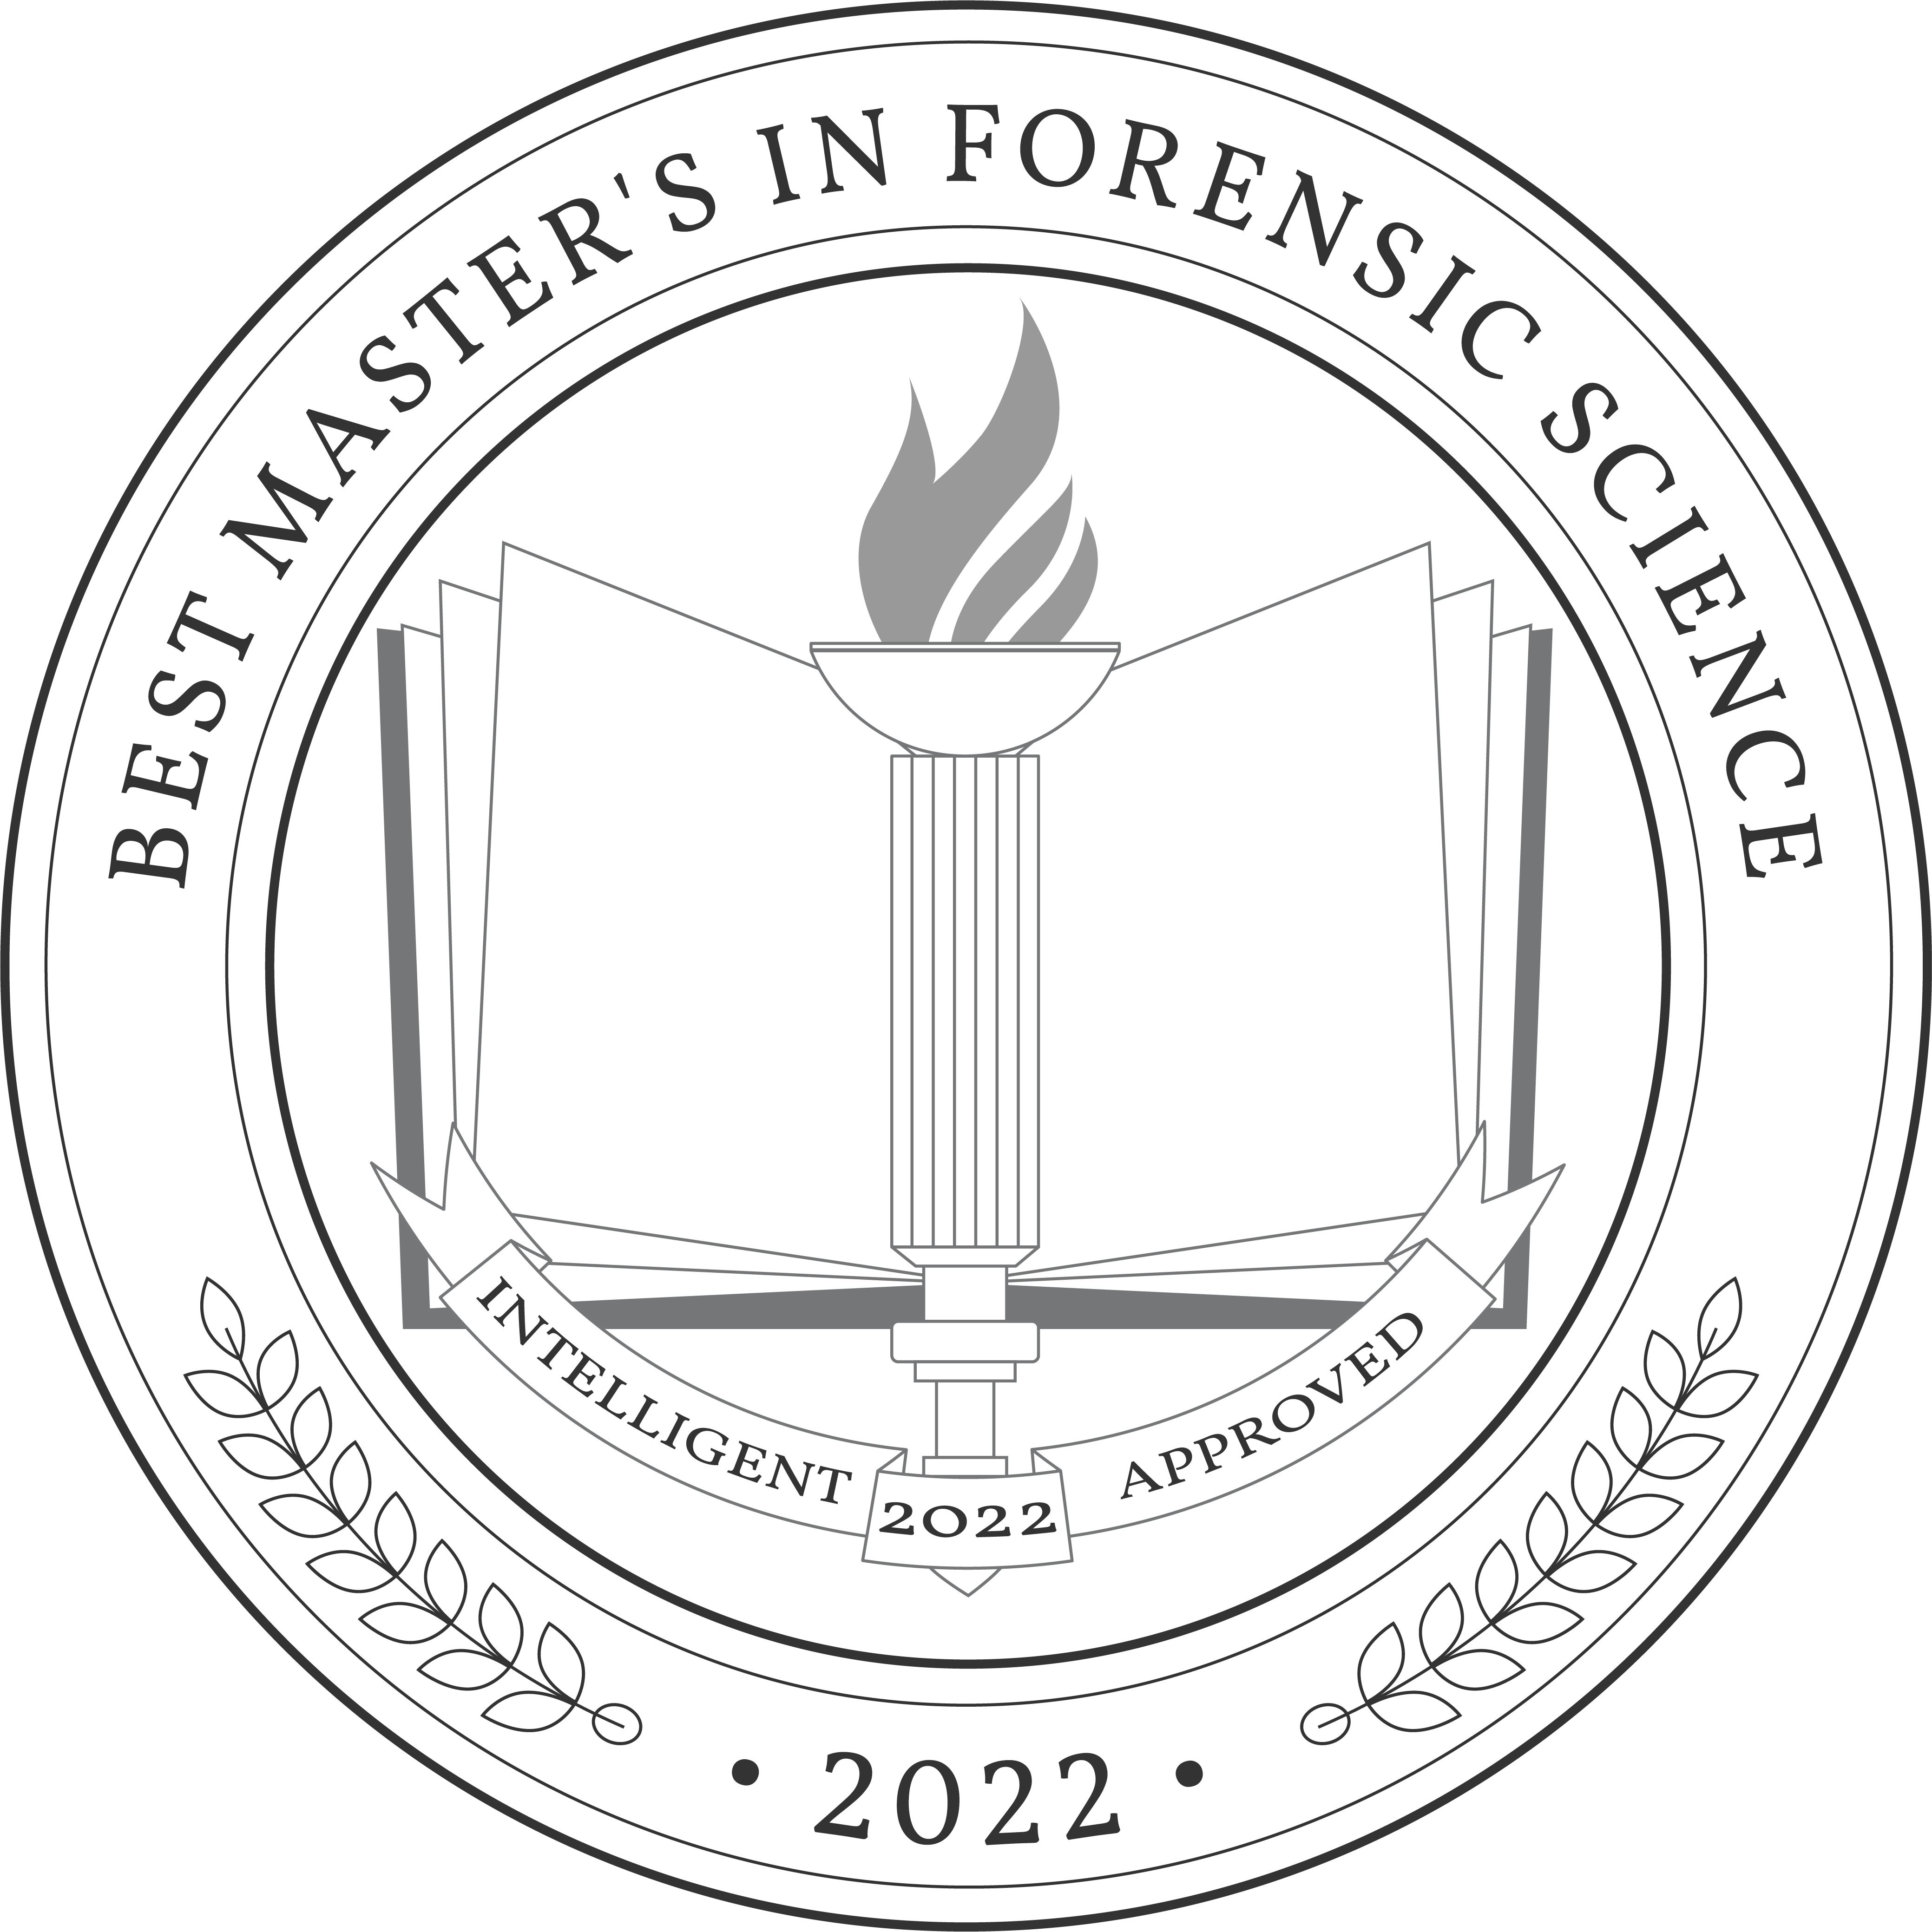 Best Master's in Forensic Science Badge-1